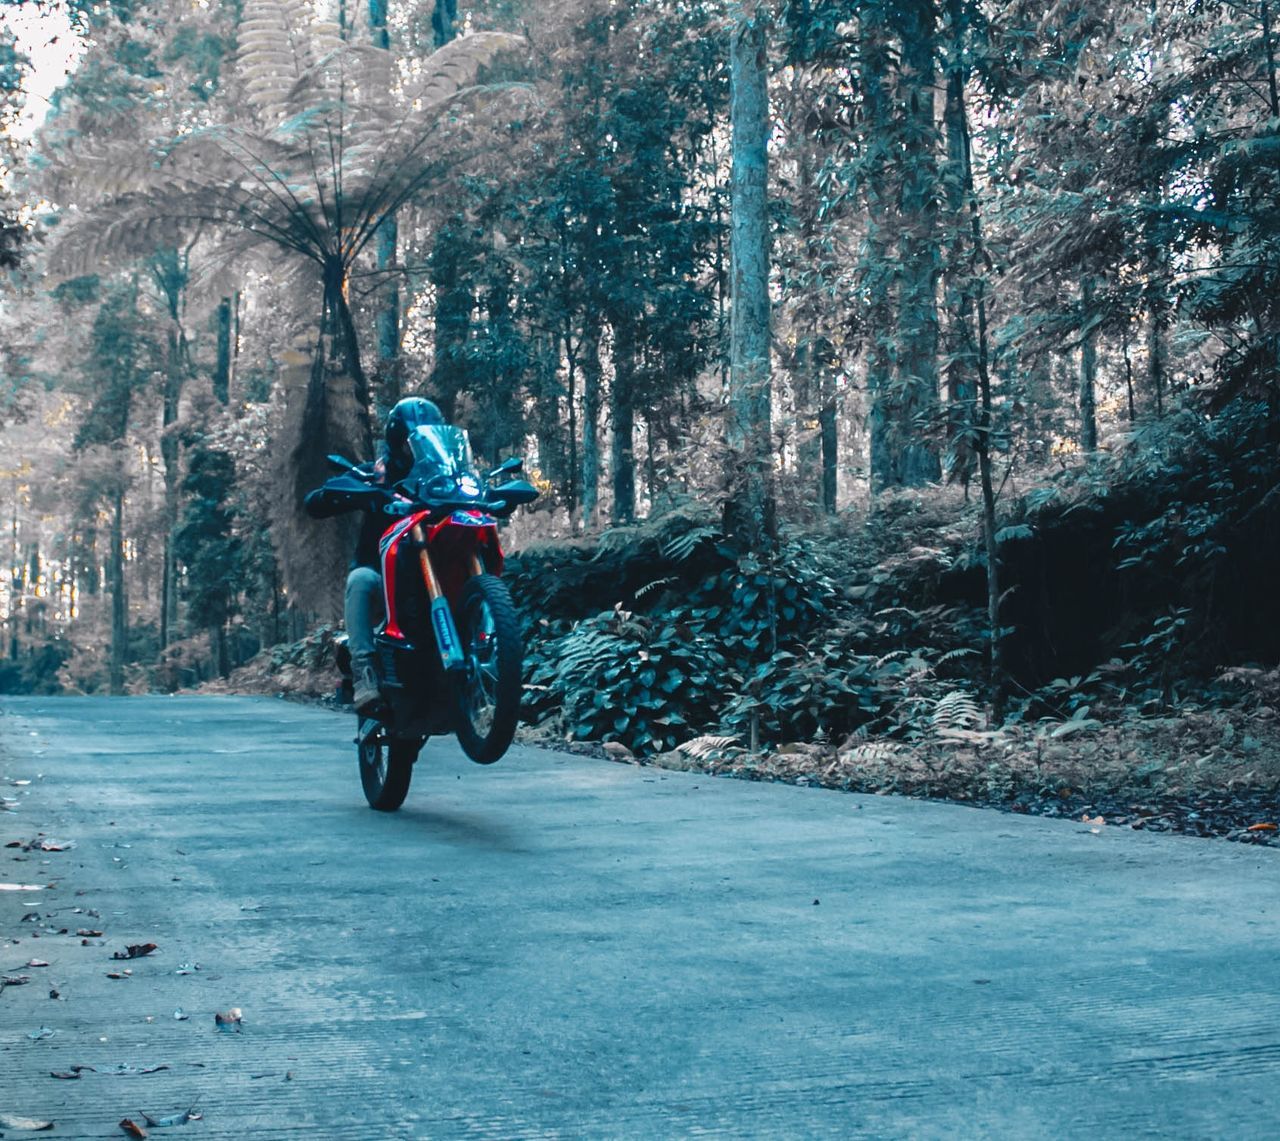 transportation, mode of transportation, one person, ride, riding, tree, motorcycle, helmet, real people, day, full length, lifestyles, road, forest, nature, land, land vehicle, plant, travel, crash helmet, outdoors, biker